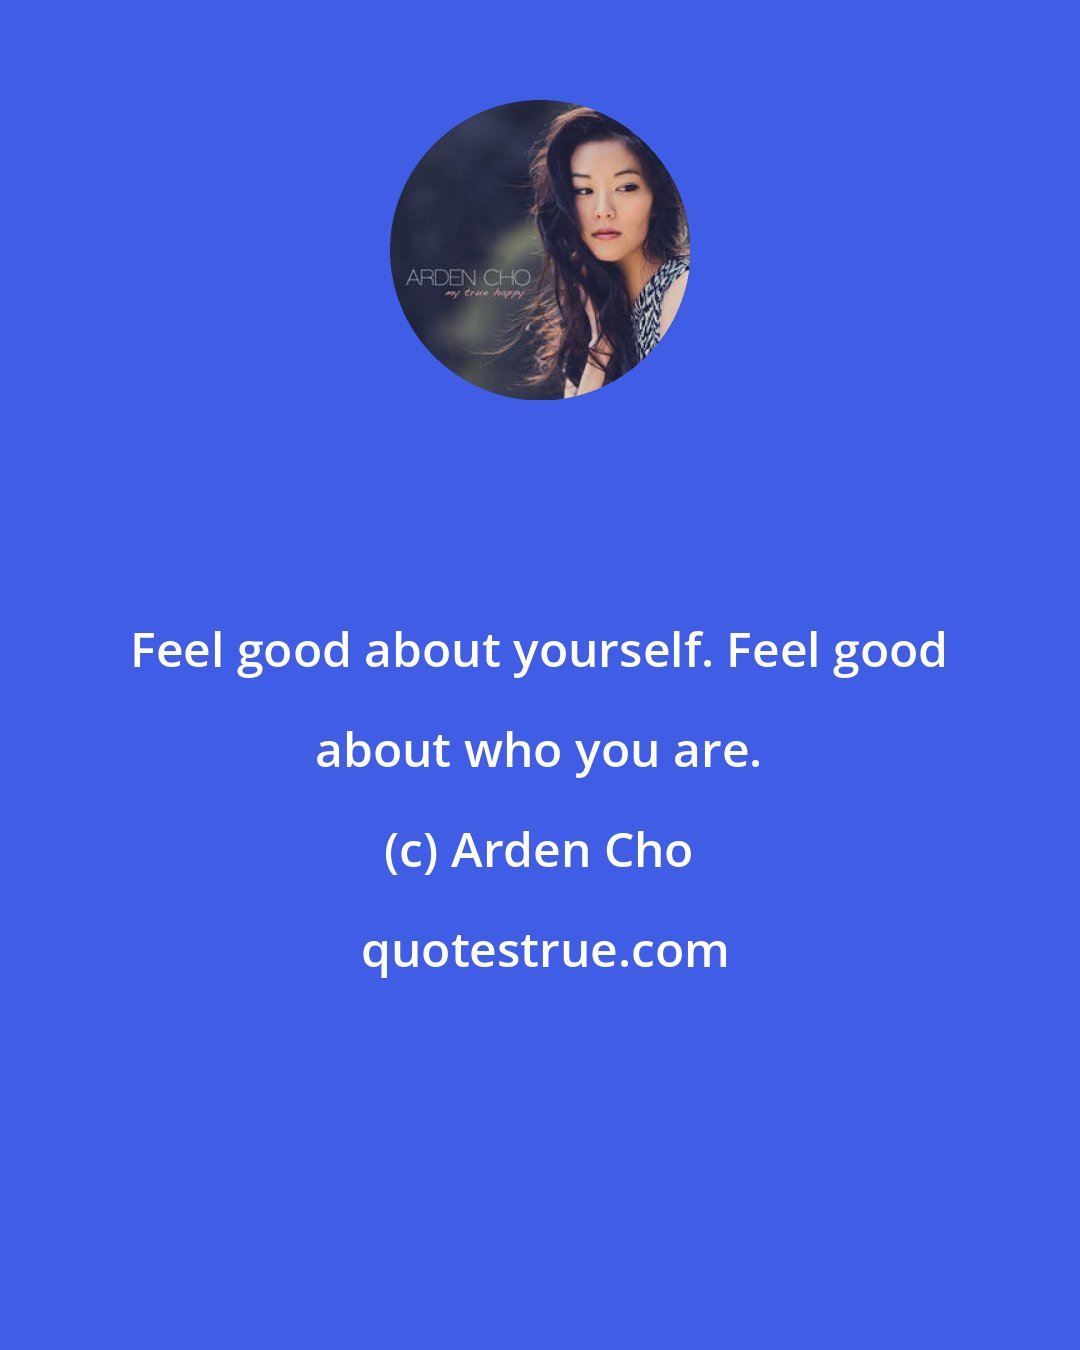 Arden Cho: Feel good about yourself. Feel good about who you are.